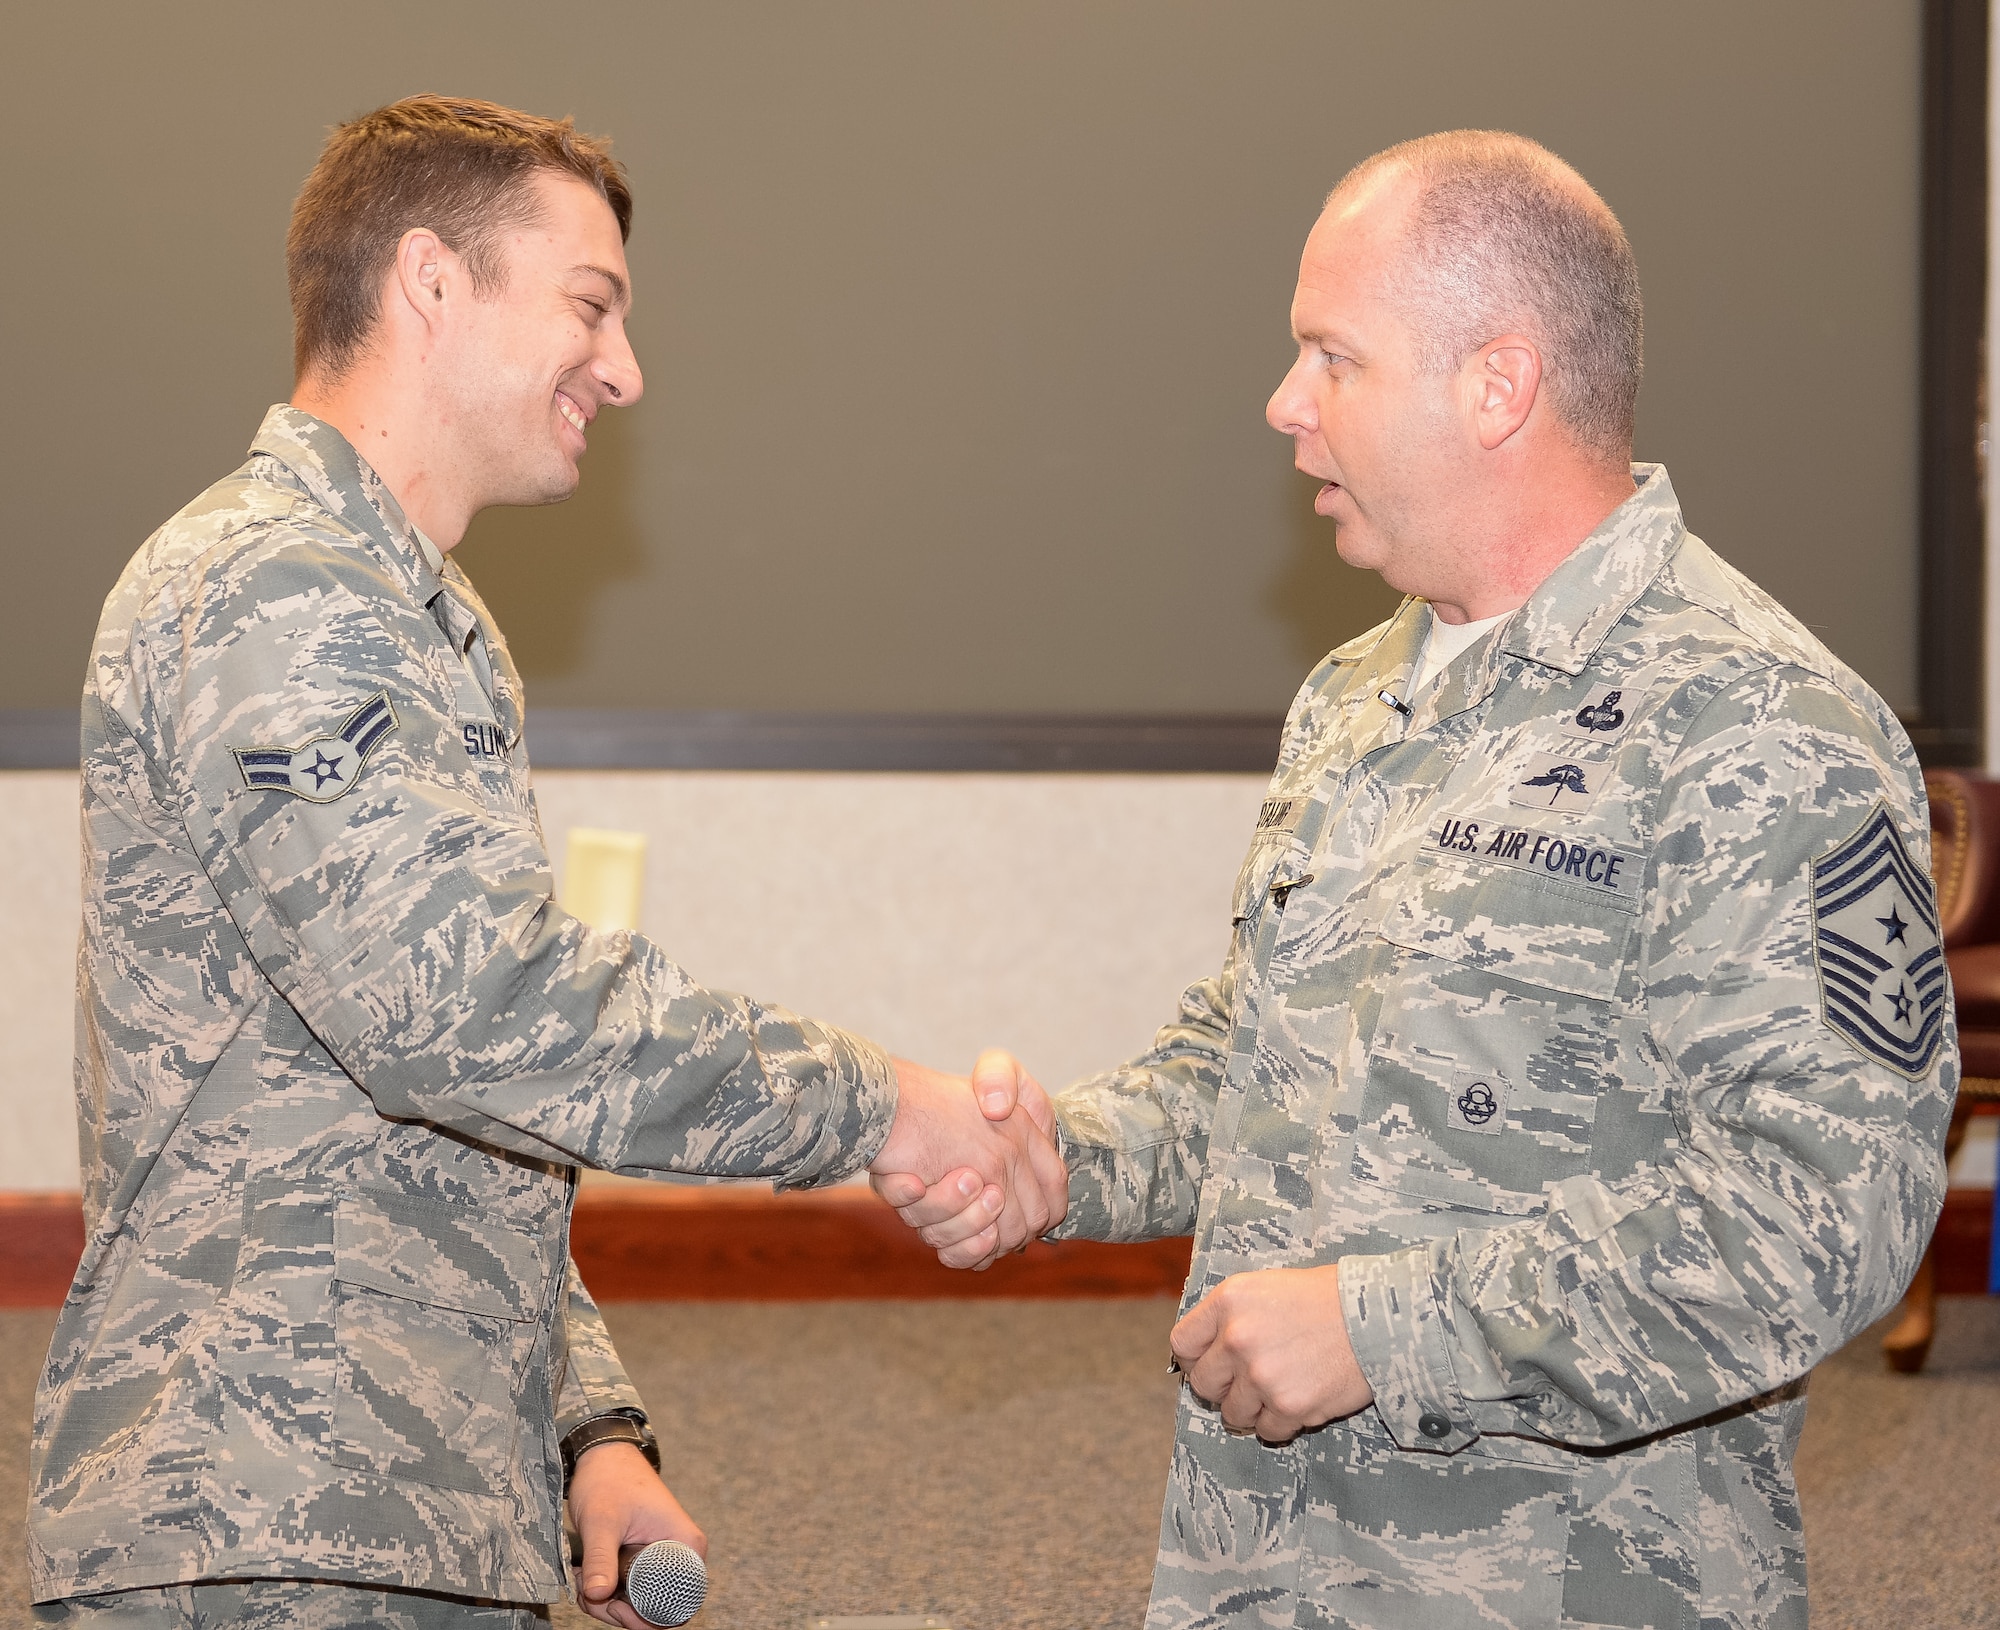 U.S. Air Force Chief Master Sgt. James W. Hotaling, Air National Guard command chief, recognizes Airman 1st Class Caleb Summers, 116th Maintenance Squadron, Georgia Air National Guard, as being one of the 116th Air Control Wing’s newest Guardsman during an enlisted all call at Robins Air Force Base, Ga., July 16, 2015. During his visit, Hotaling conducted two town hall style meetings and met with key enlisted leadership councils and Airmen resiliency representatives. His time with the Airmen focused on sharing his message of a renewed commitment to the profession of arms, health of the force, and recognition of our Airmen and accomplishments. The visit offered the opportunity for Airmen in the wing to meet their top leader, share their concerns and gain perspective from the national level. (U.S. Air National Guard photo by Tech. Sgt. Regina Young/Released)